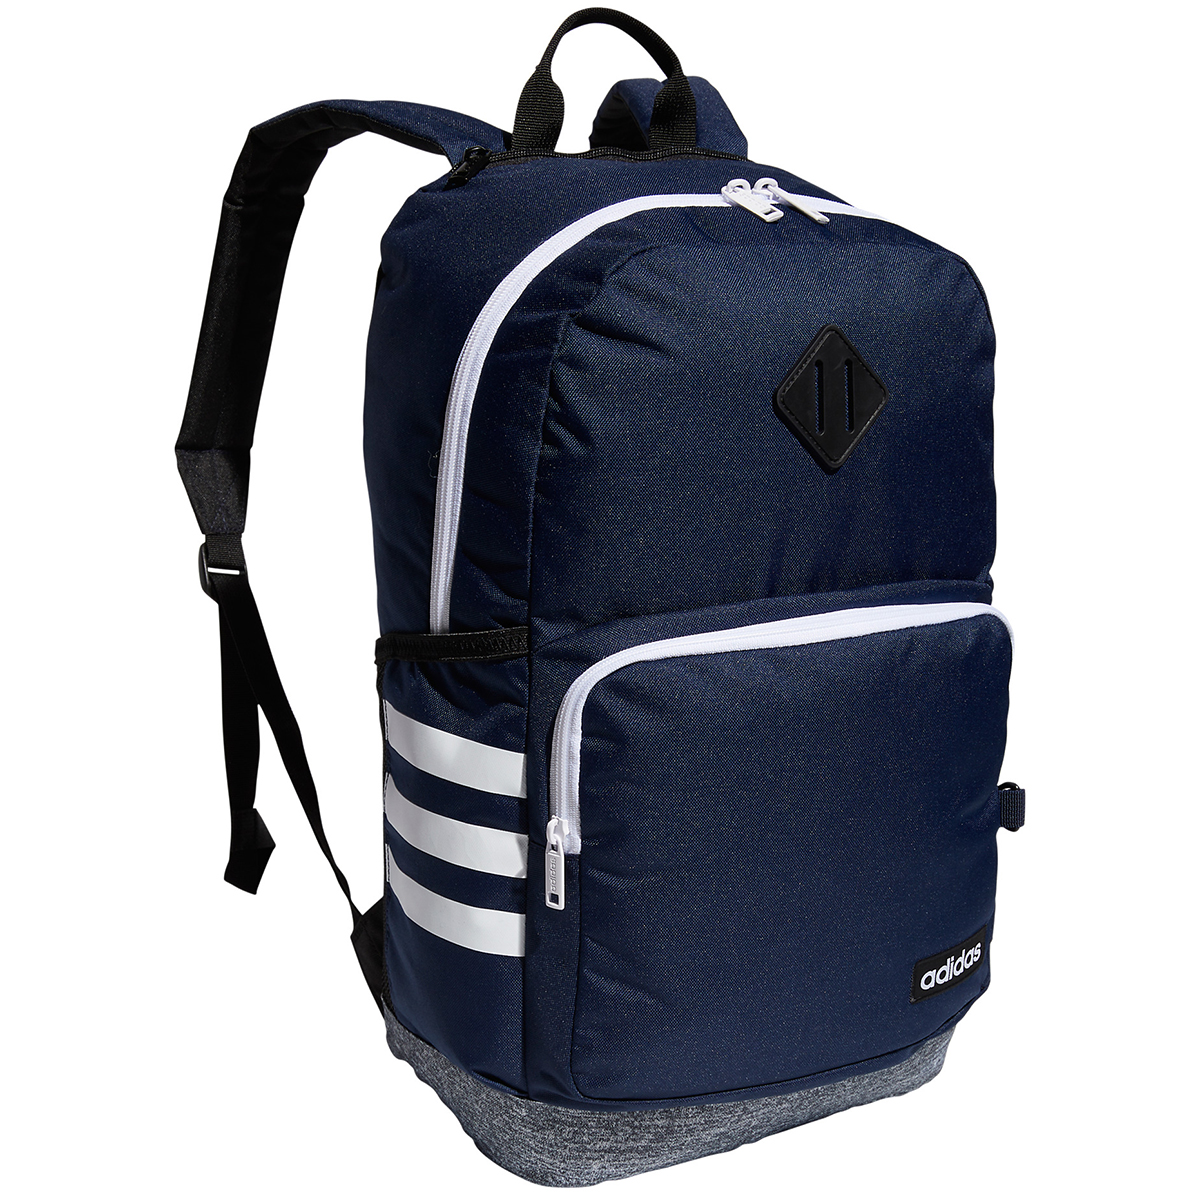 Adidas Classic 3-Stripes 4.0 Backpack